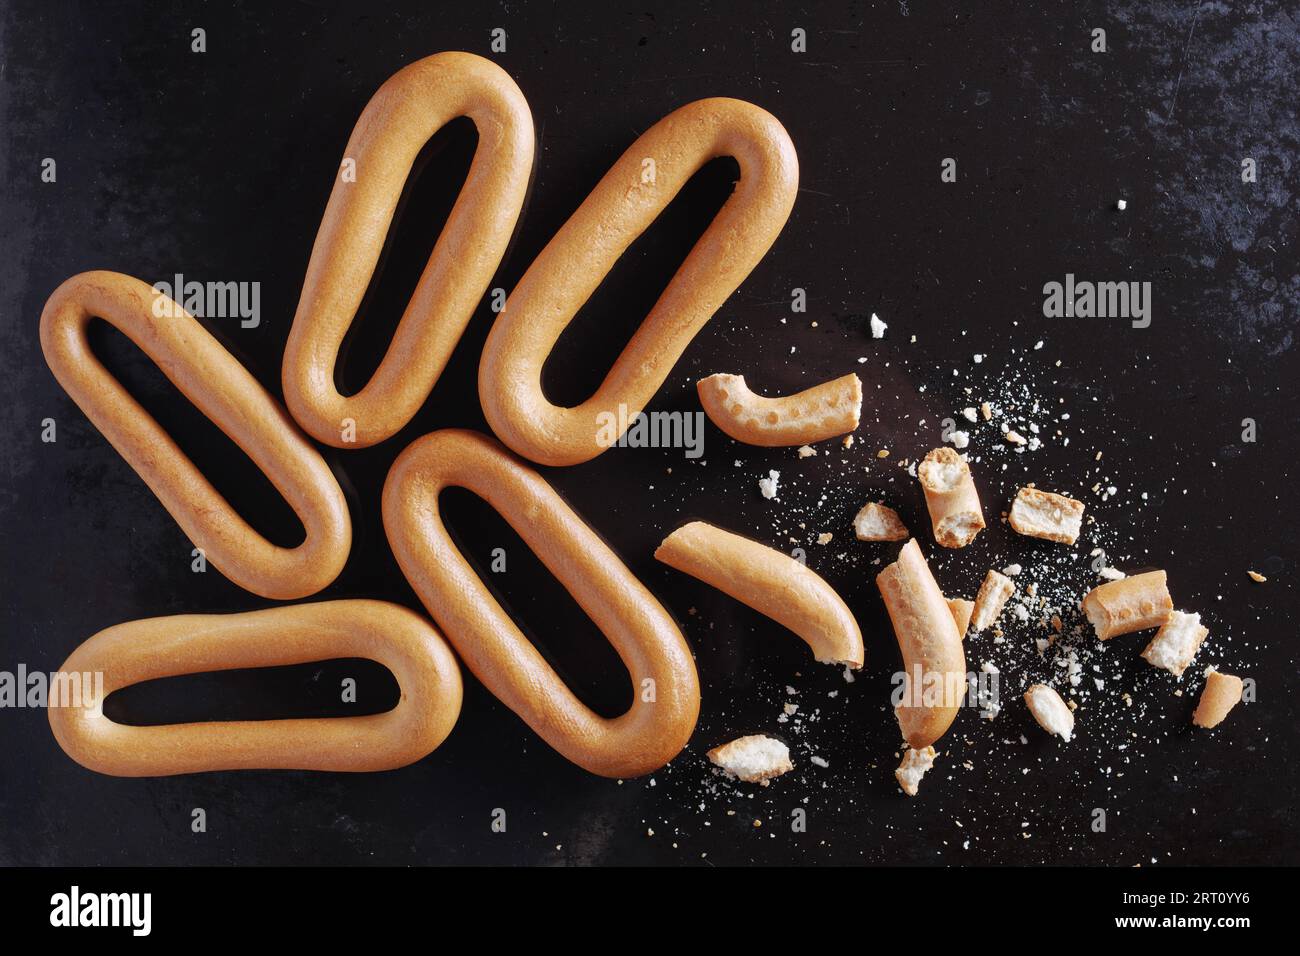 Oval bagels whole and broken on the old metal surface. Close up, top view Stock Photo